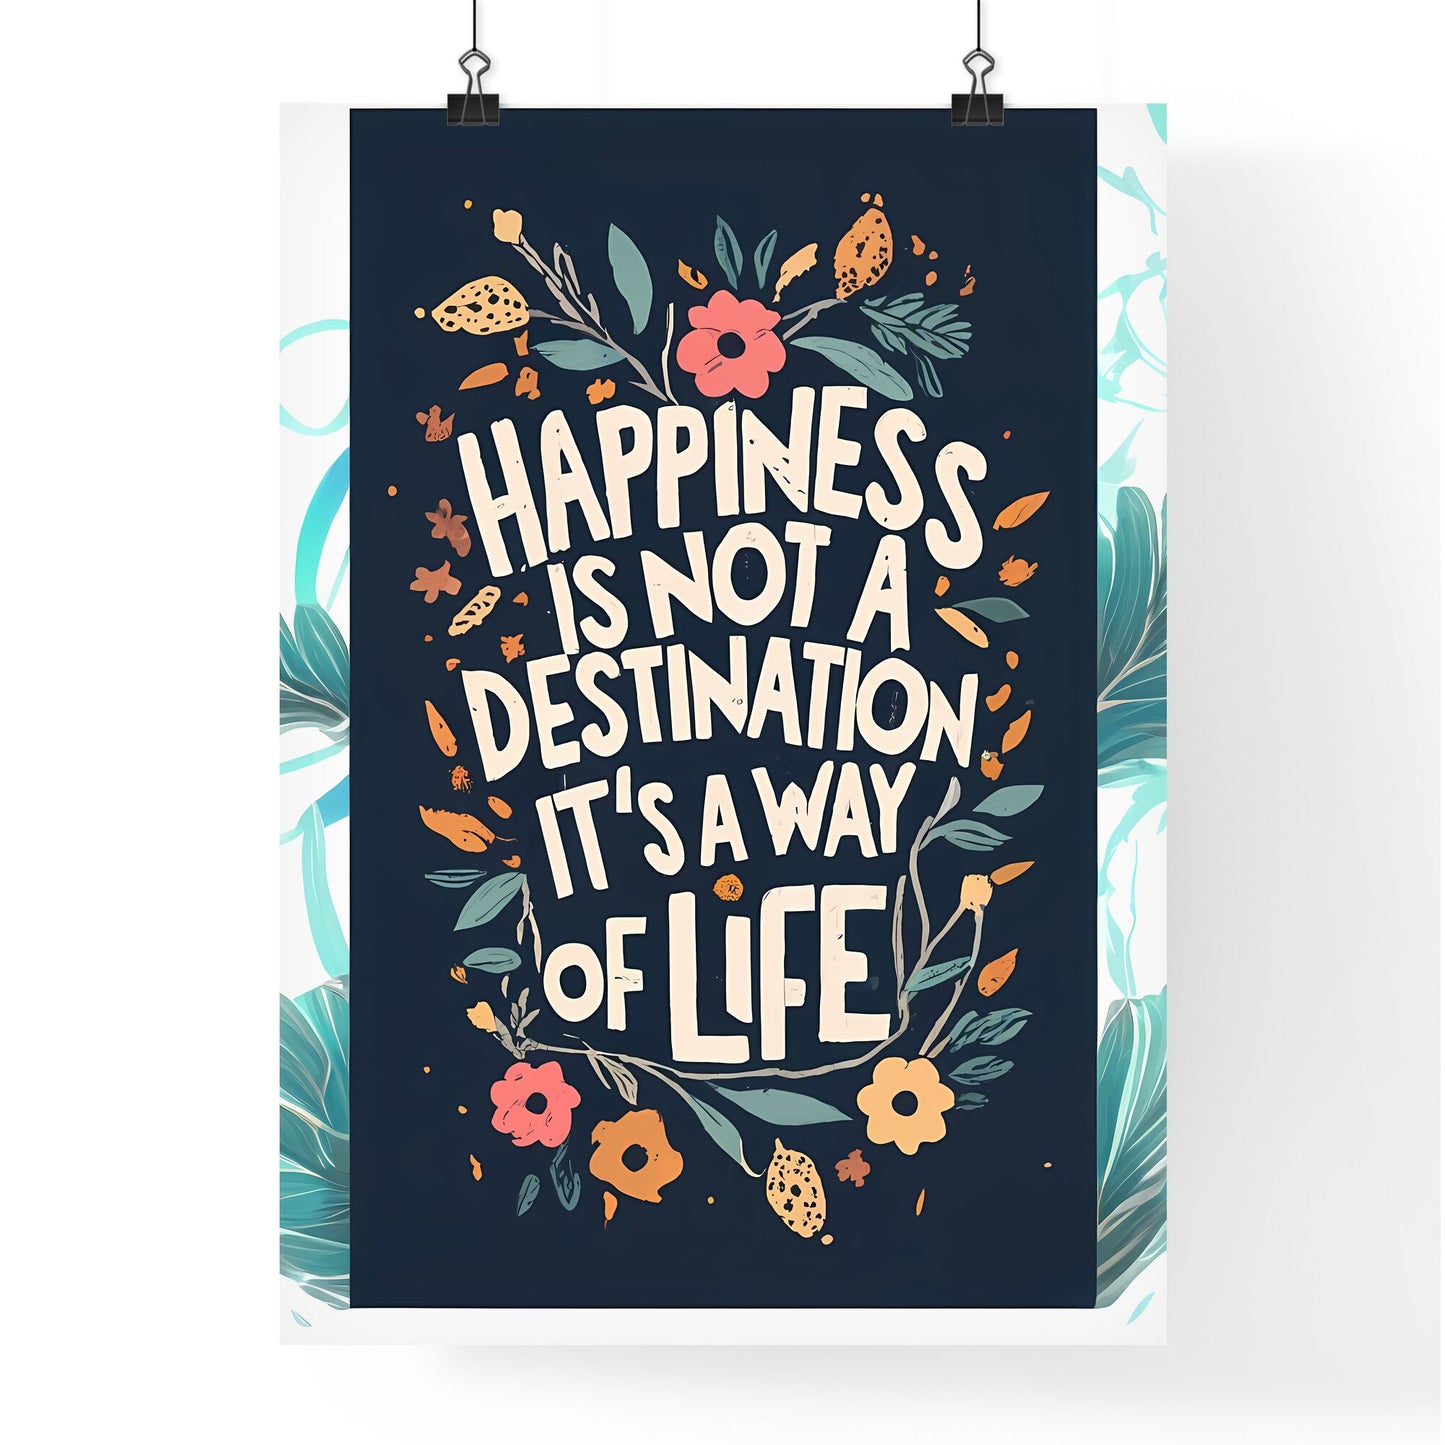 Happiness Is Not A Destination - A Black Rectangular Sign With White Text And Flowers Default Title